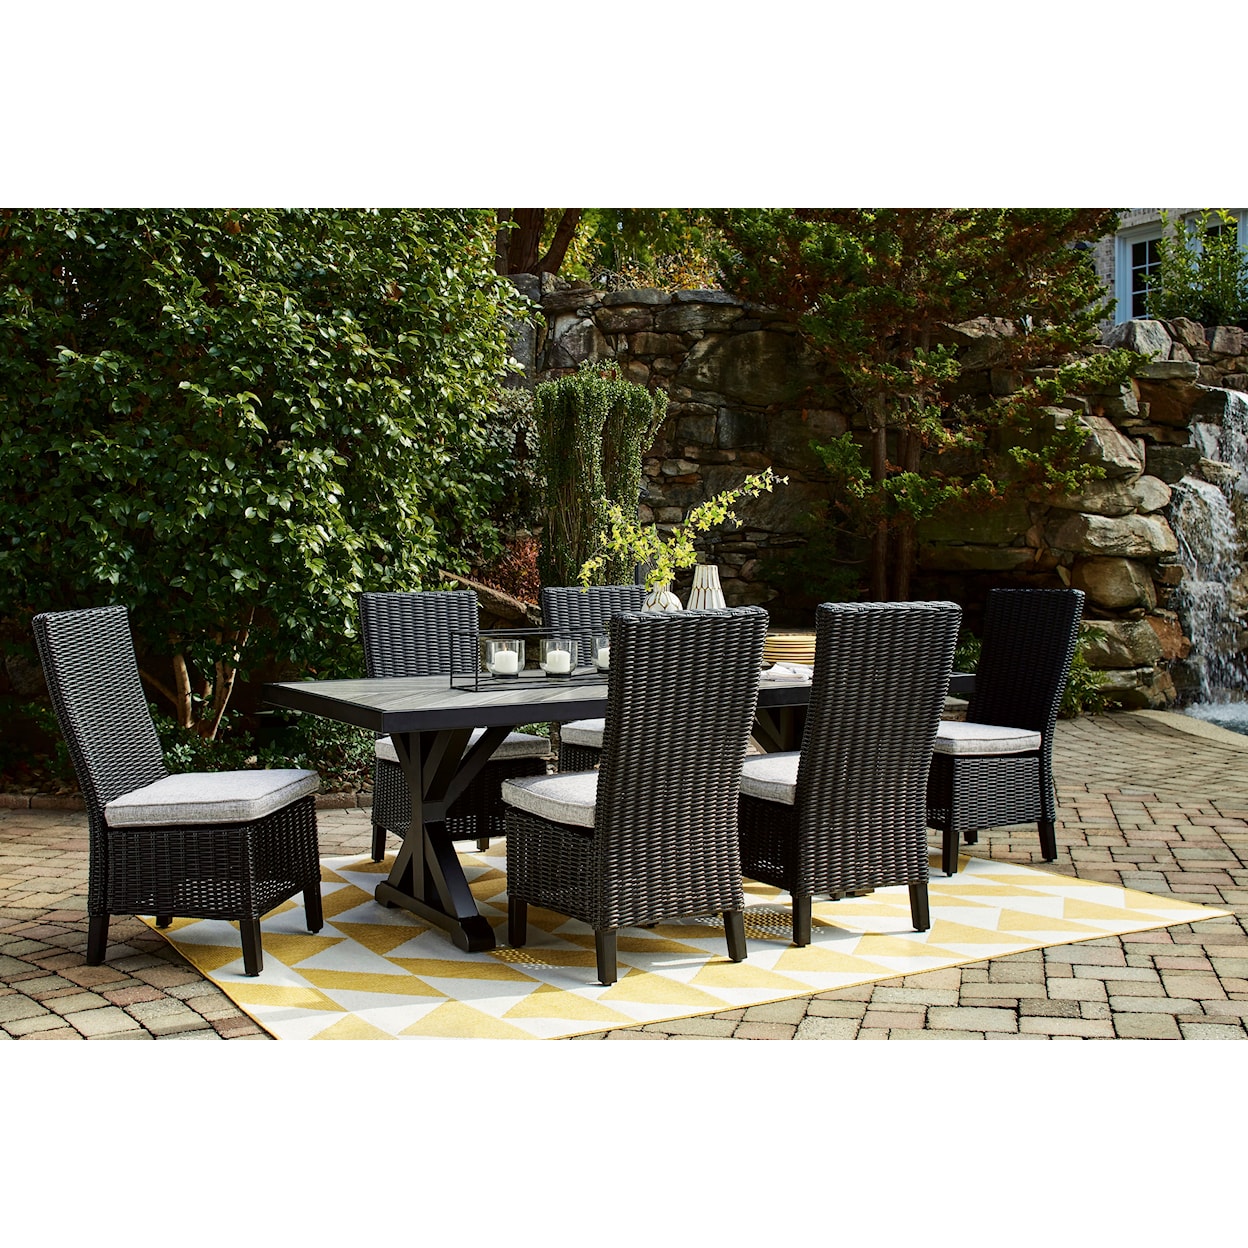 Michael Alan Select Beachcroft Outdoor Dining Table with 6 Chairs